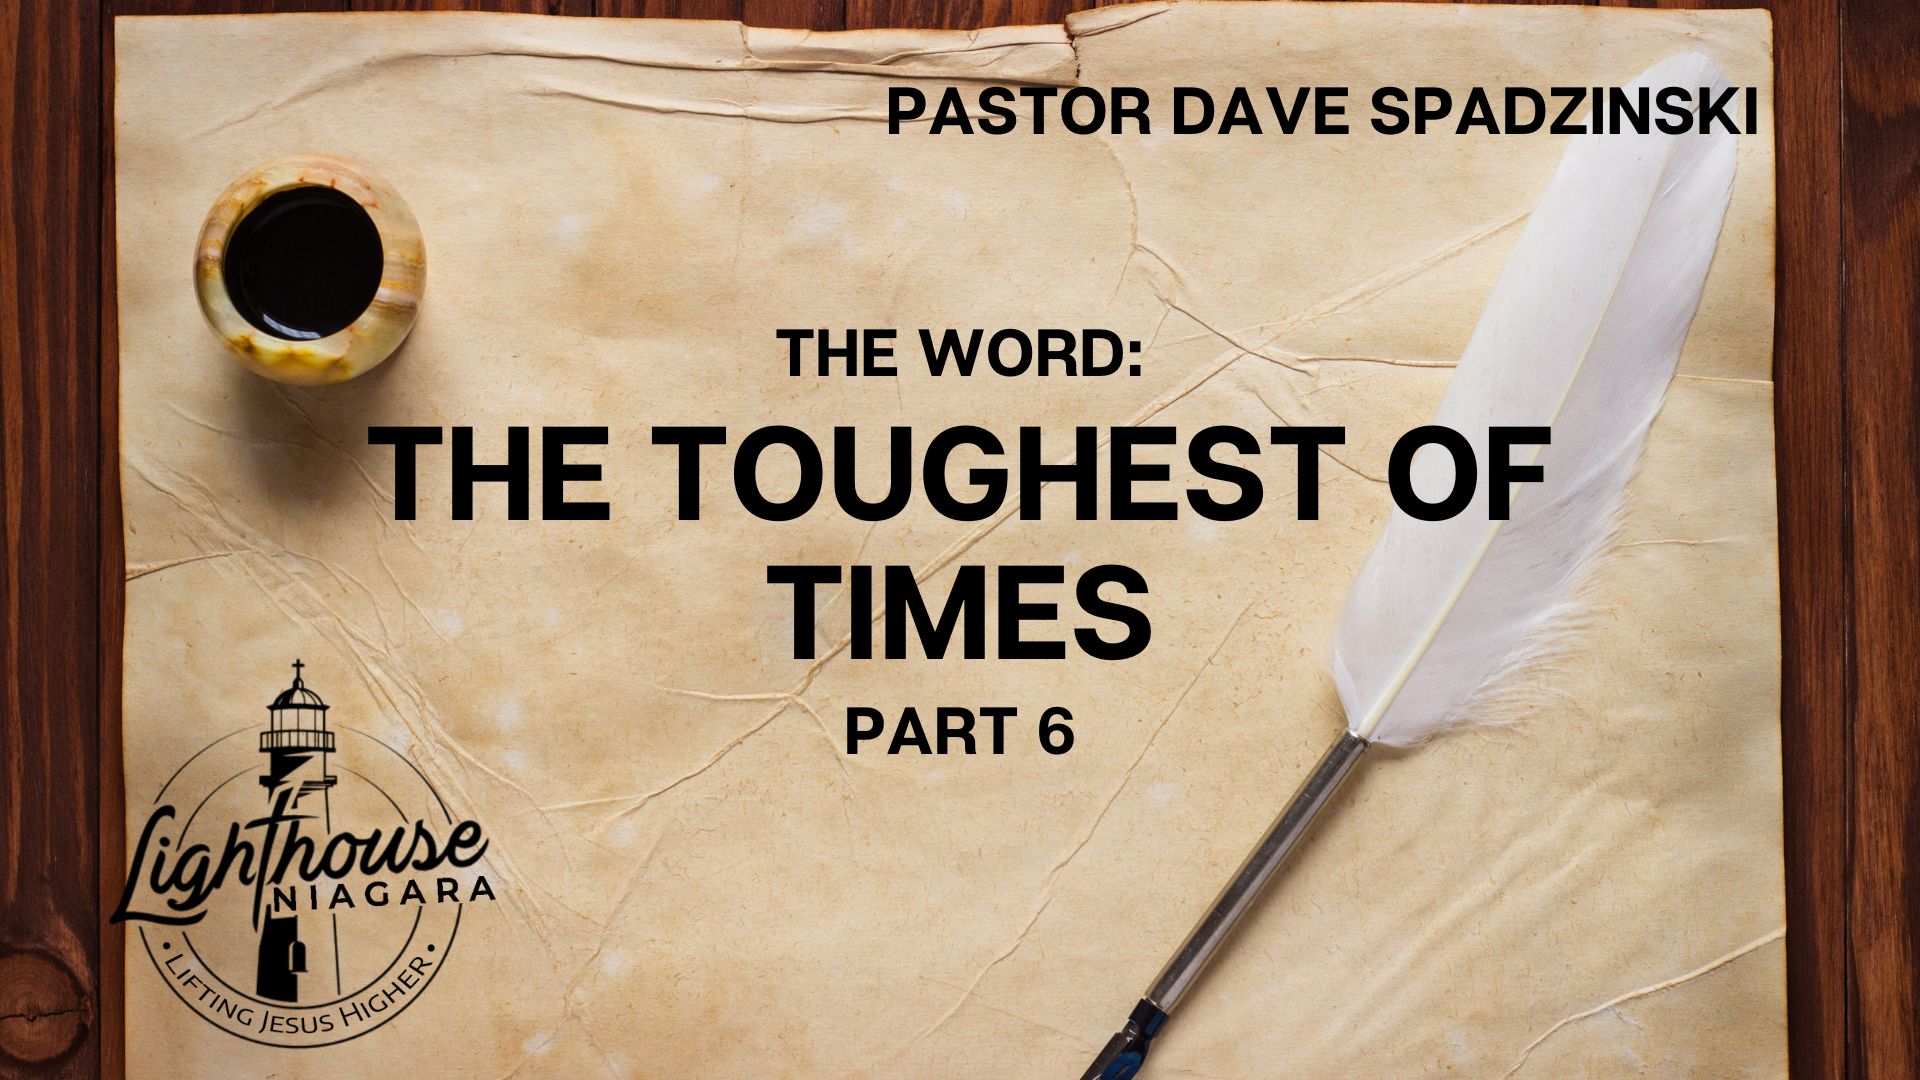 The Word: The Toughest of Times - Pastor Dave Spadzinski